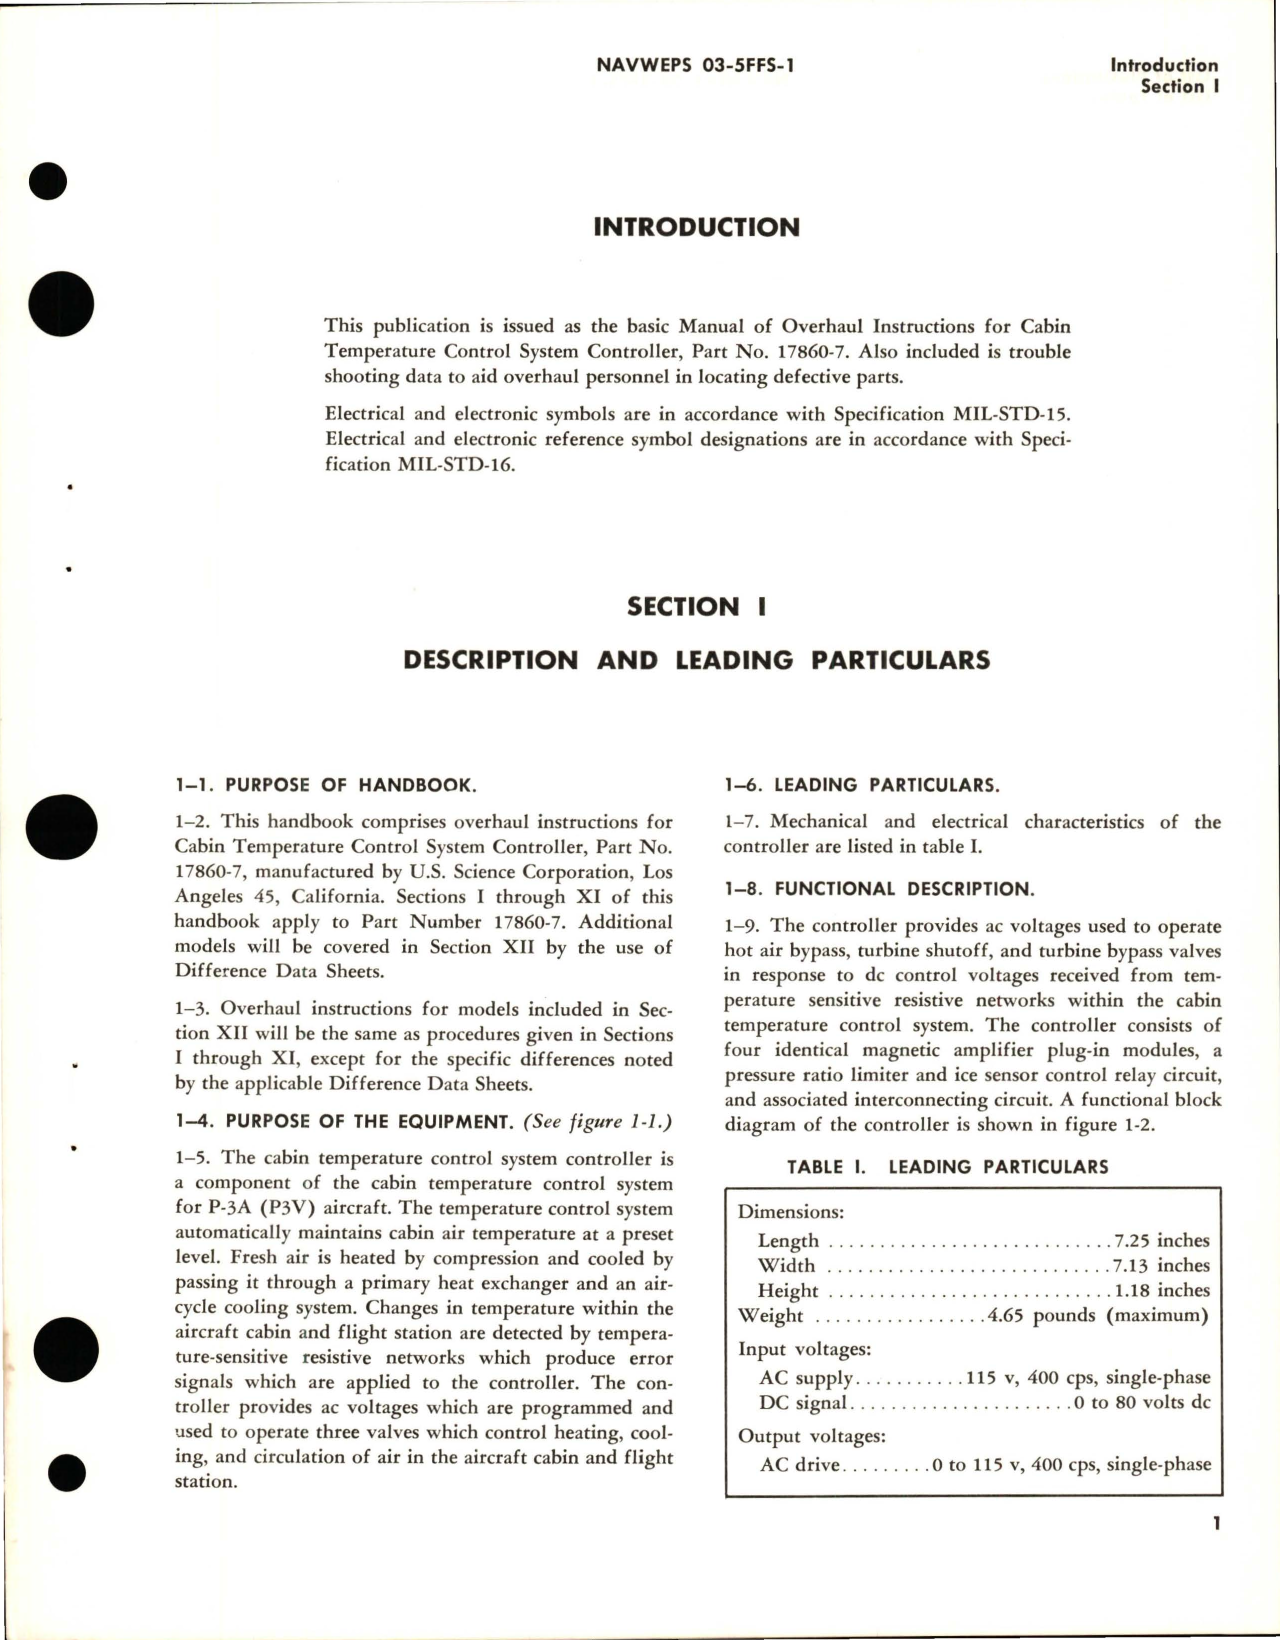 Sample page 5 from AirCorps Library document: Overhaul Instructions for Cabin Temperature Control System Controller - Part 17860-7